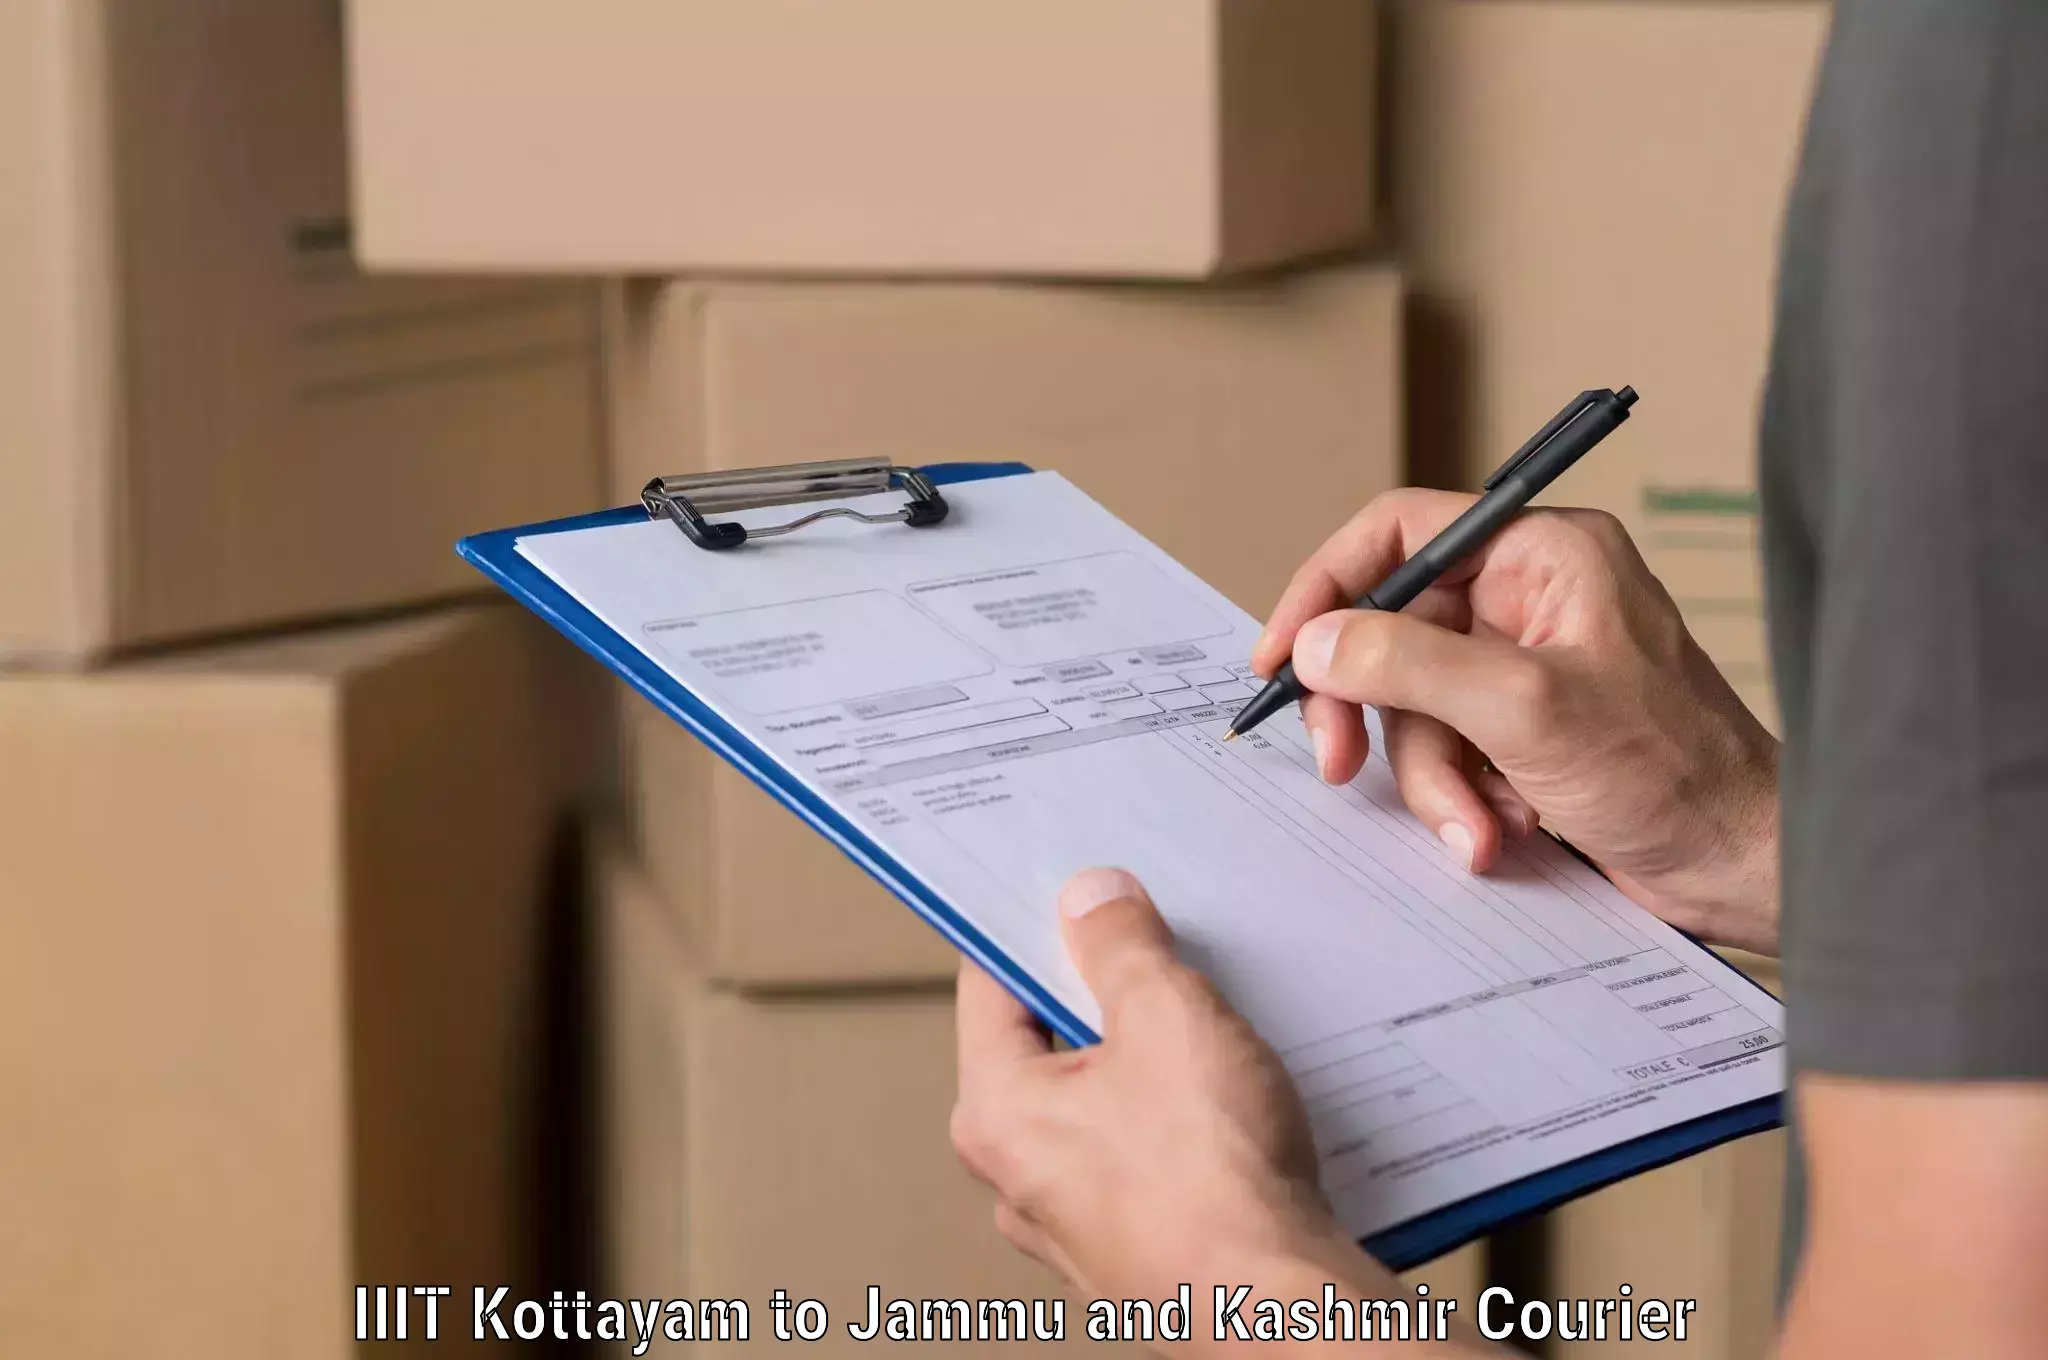 Courier service booking in IIIT Kottayam to Baramulla